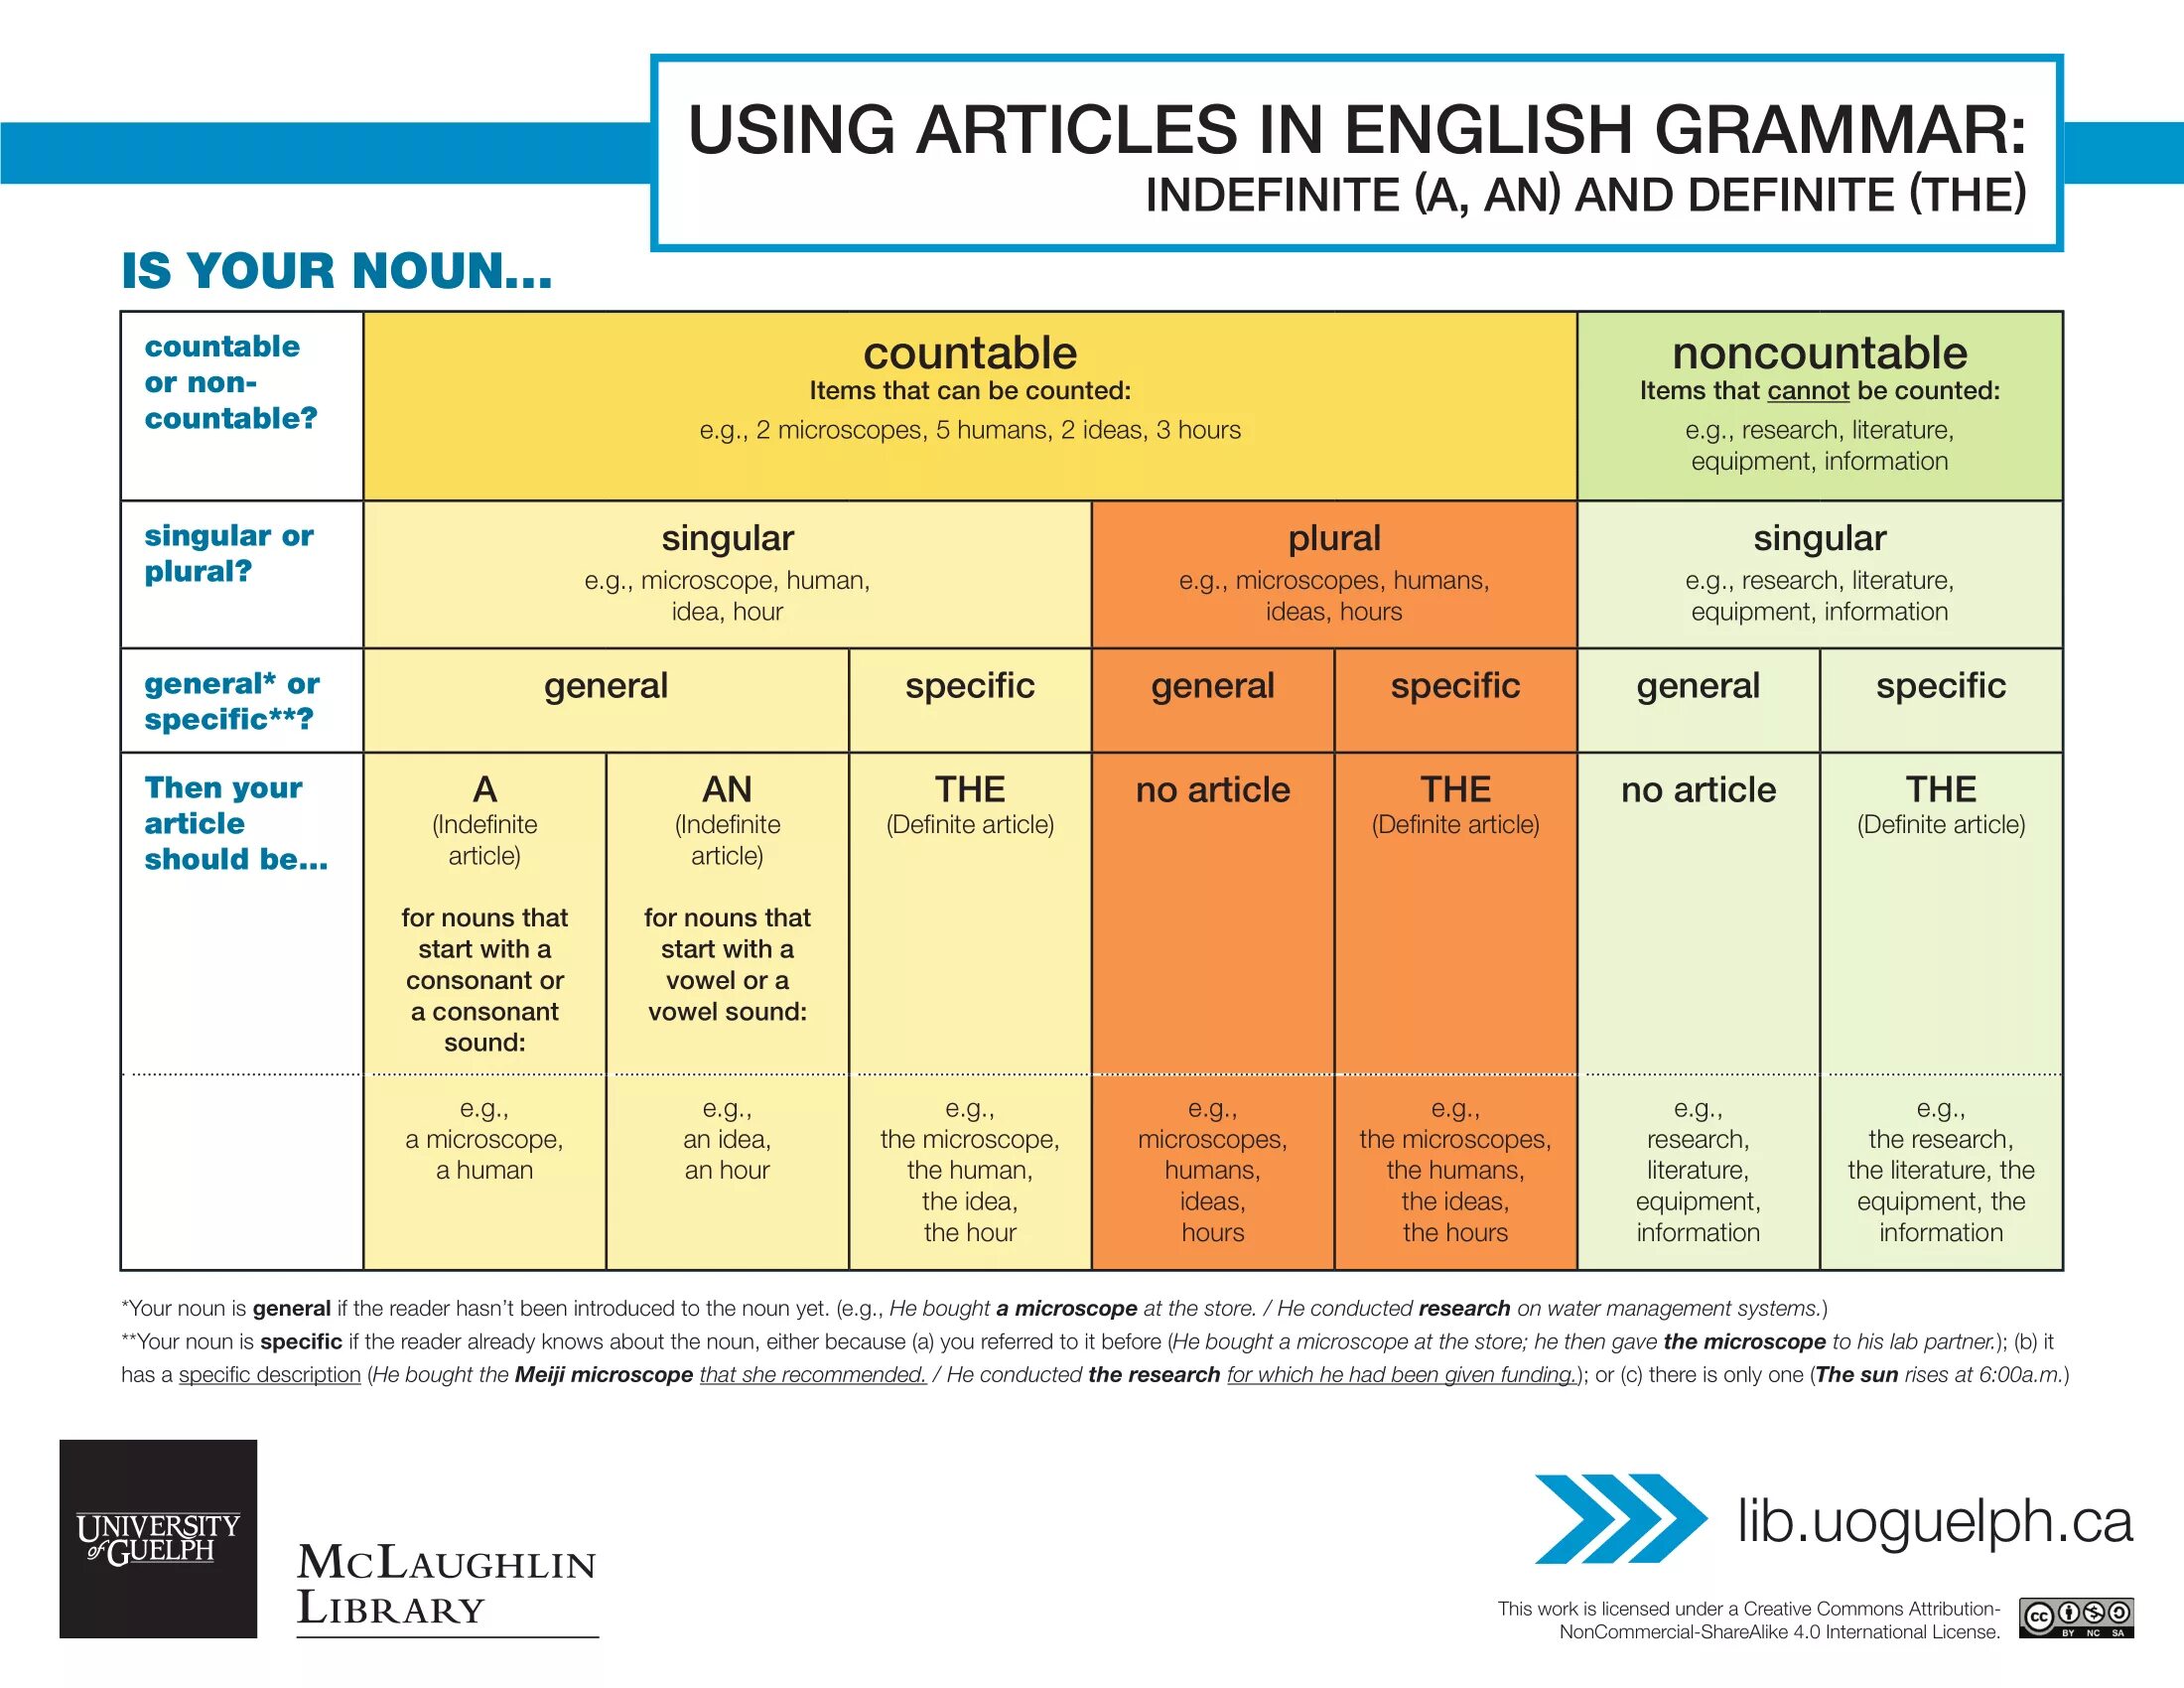 Detailed articles. Articles English Grammar. Use of articles in English. Articles in English правила. Indefinite and definite articles (неопр. И опр. Артикли).